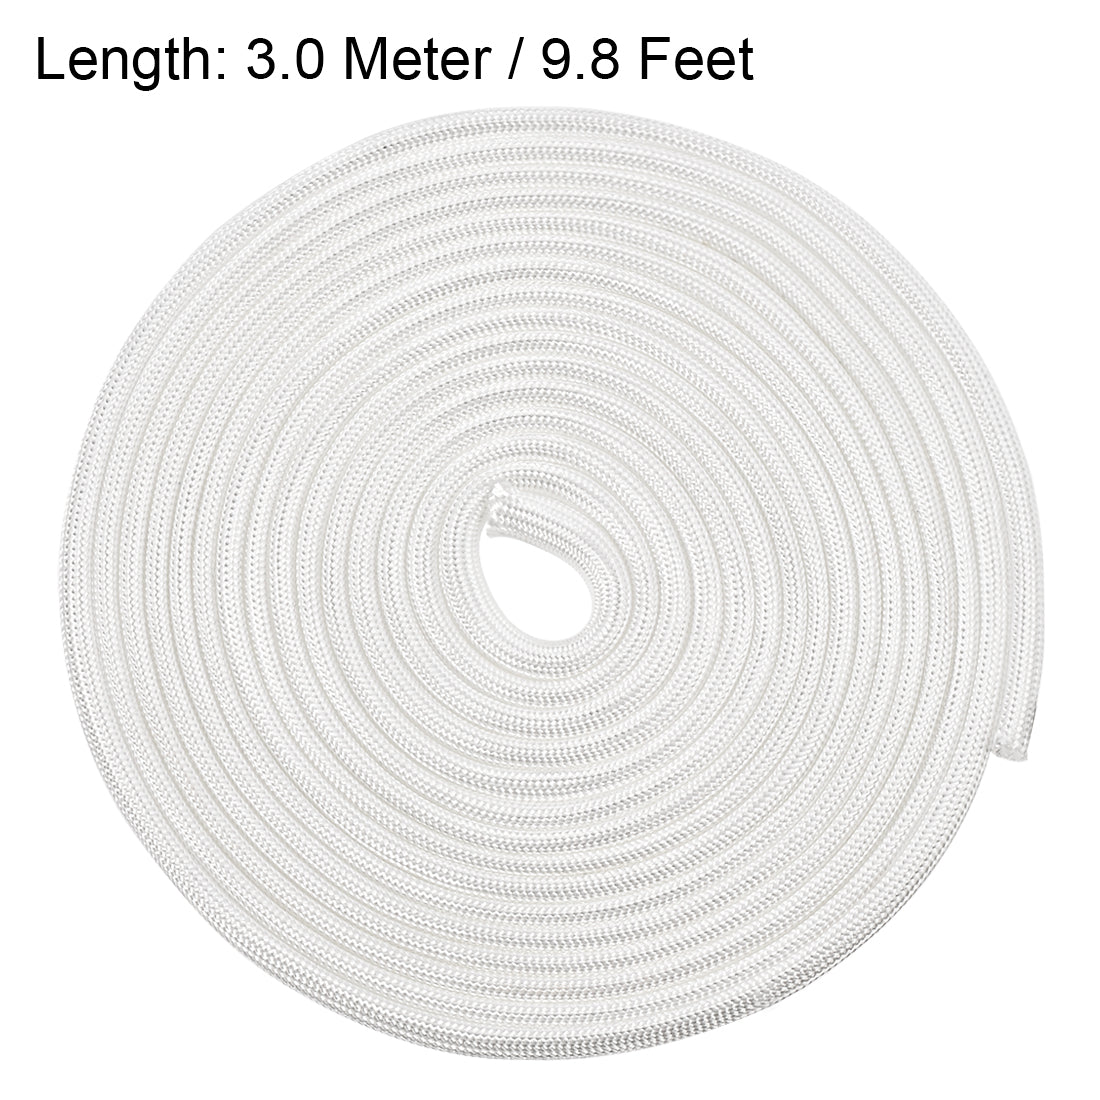 uxcell Uxcell Insulation Cable Protector, 9.8Ft-4mm High TEMP Fiberglass Sleeve White